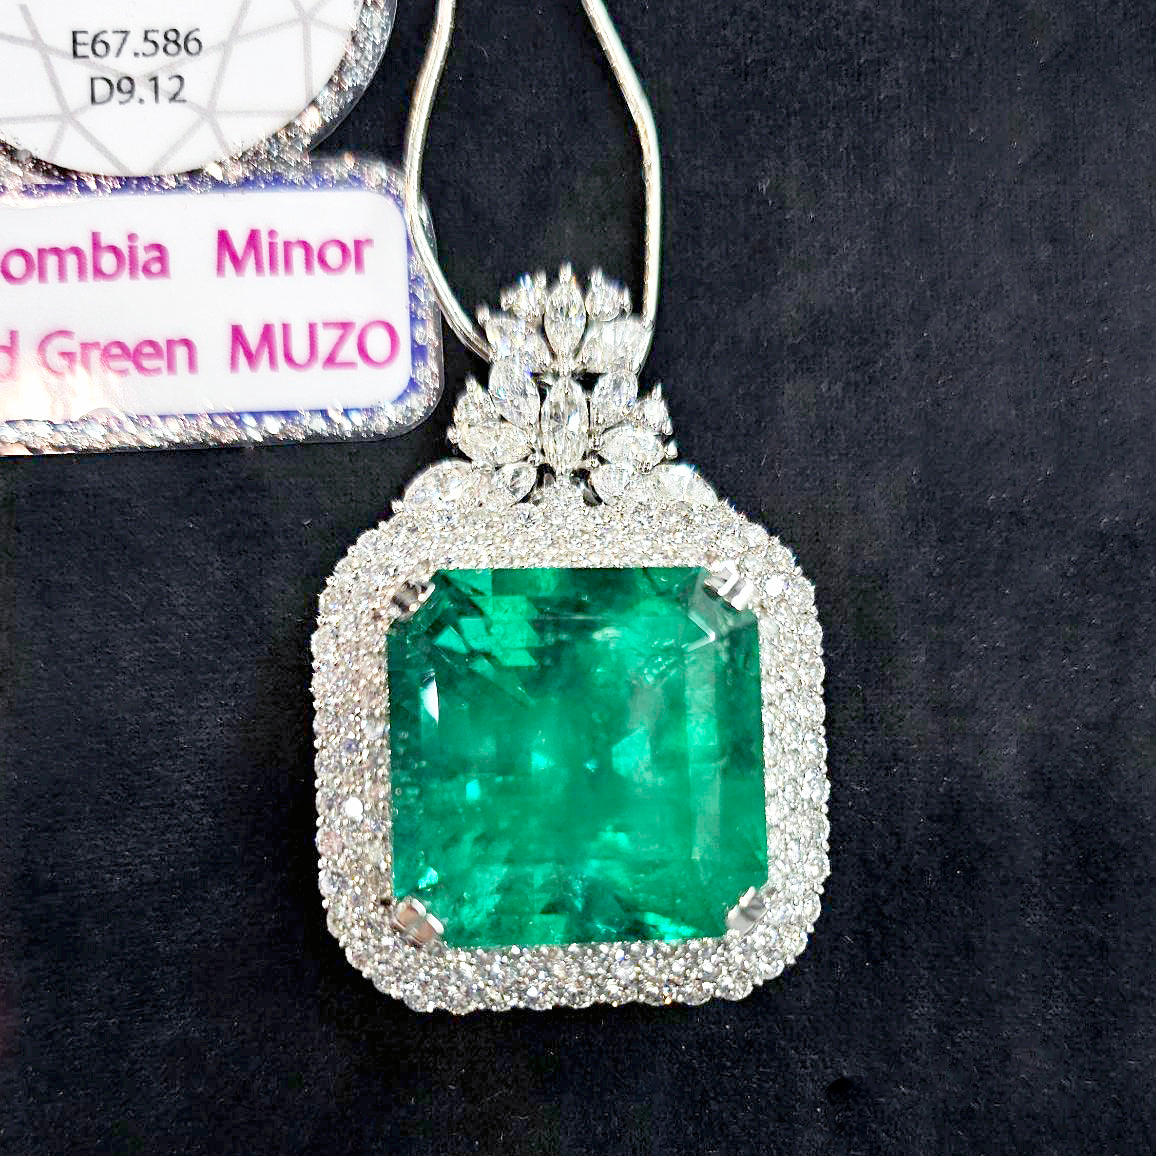 World's largest and highest quality Colombian old mine muzo 67.586ct natural emerald total 9.12ct natural diamond Pt900 platinum pendant necklace [with GRS certificate of authenticity].